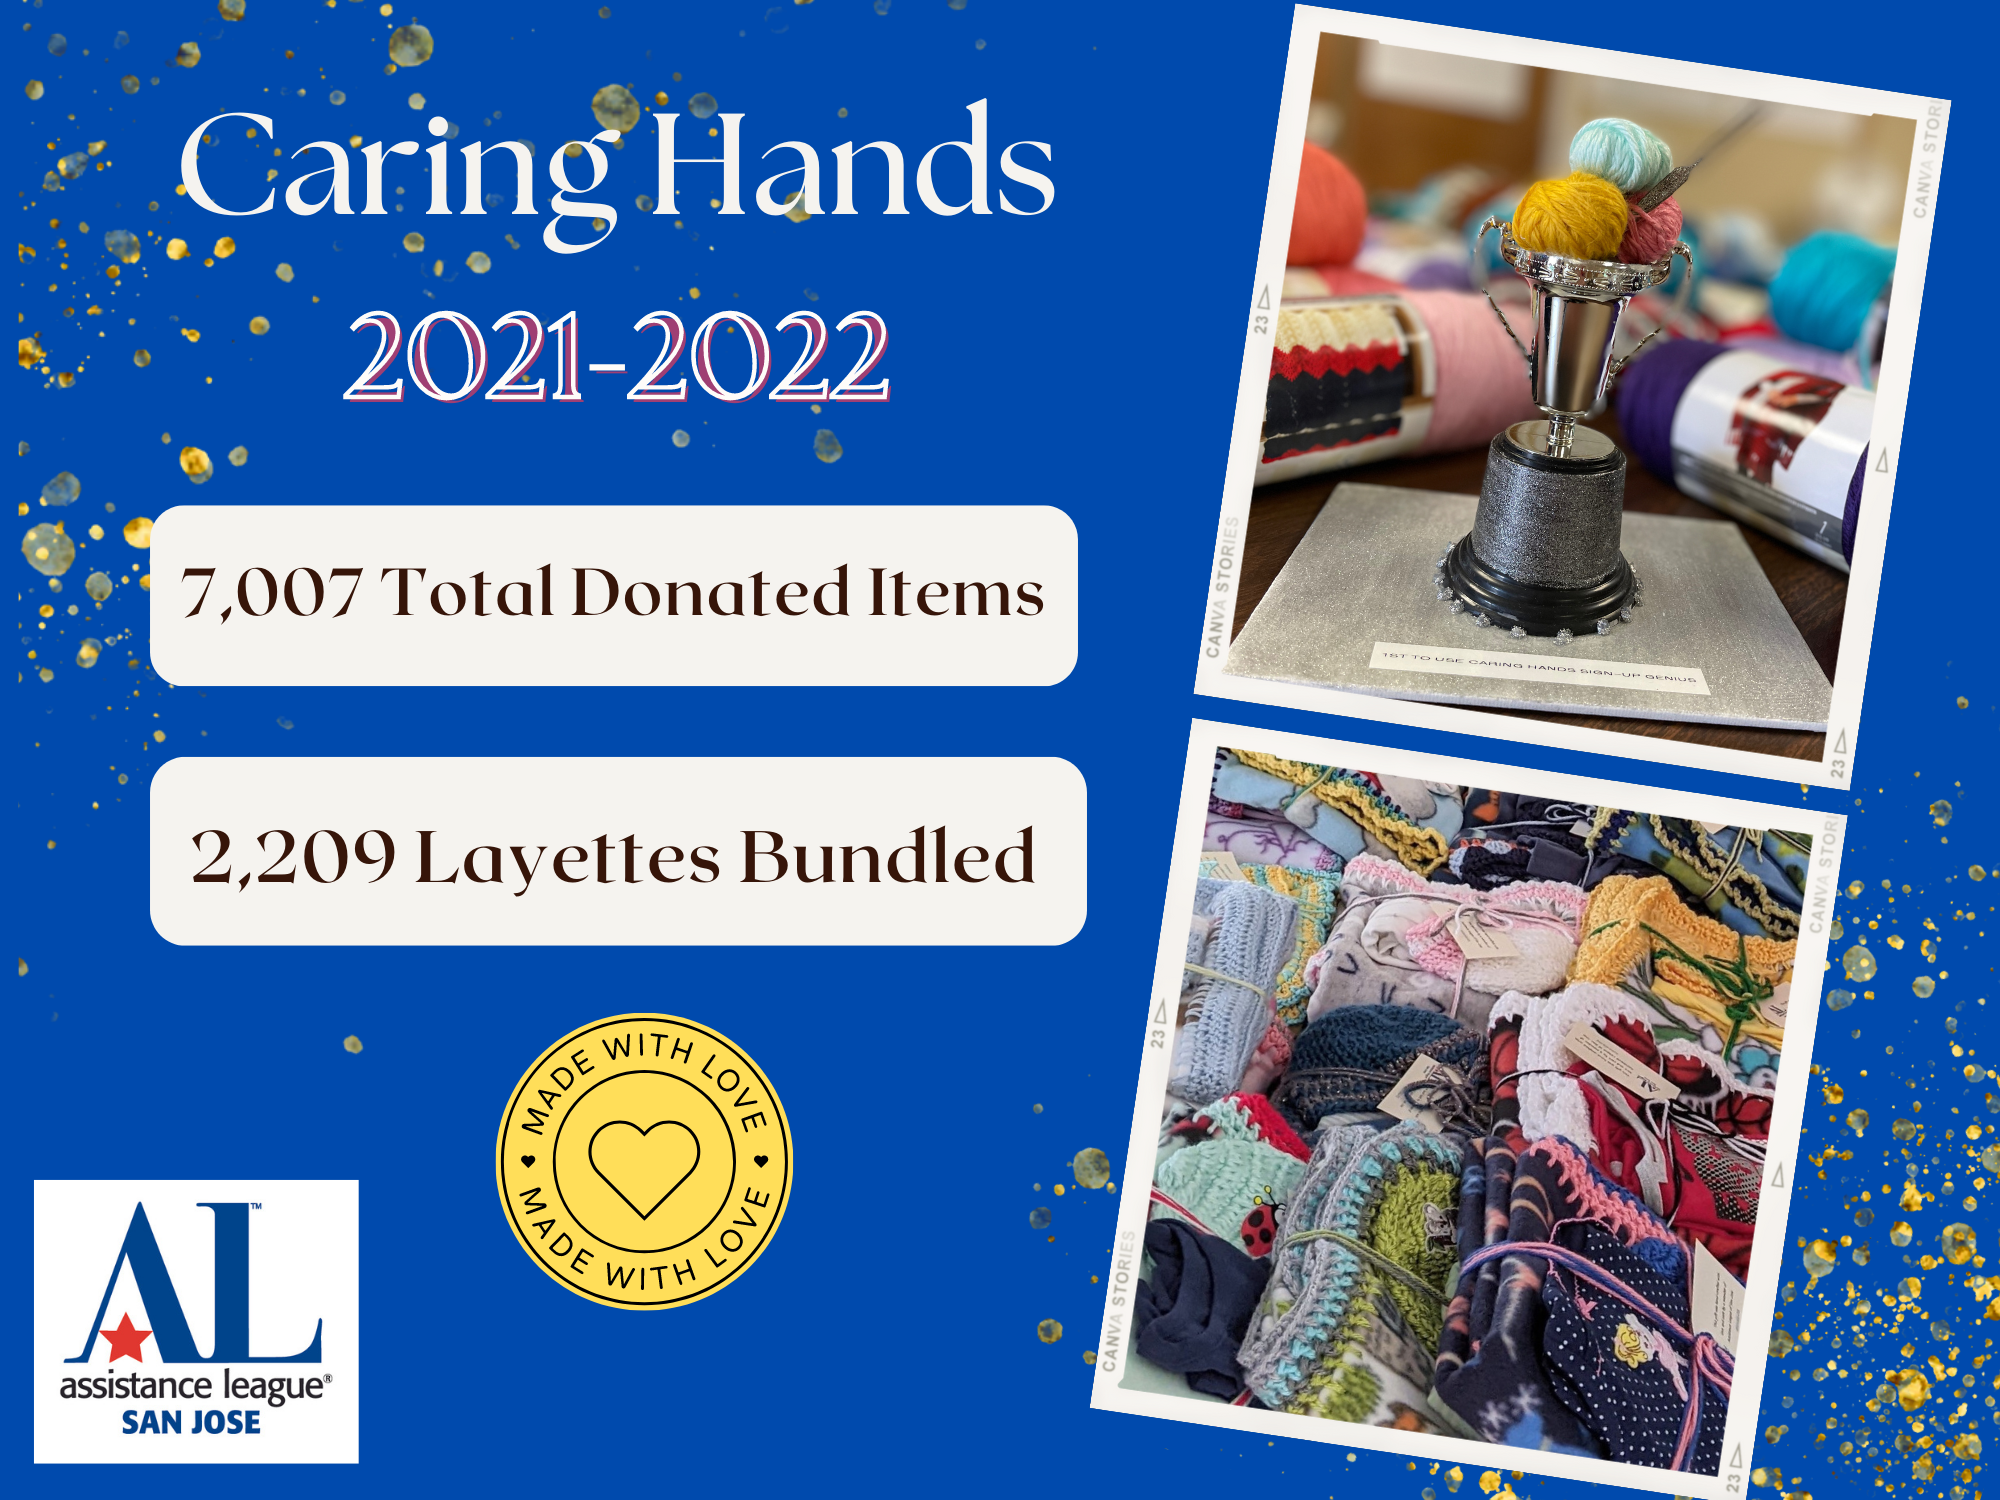 Caring Hands 2021-2022